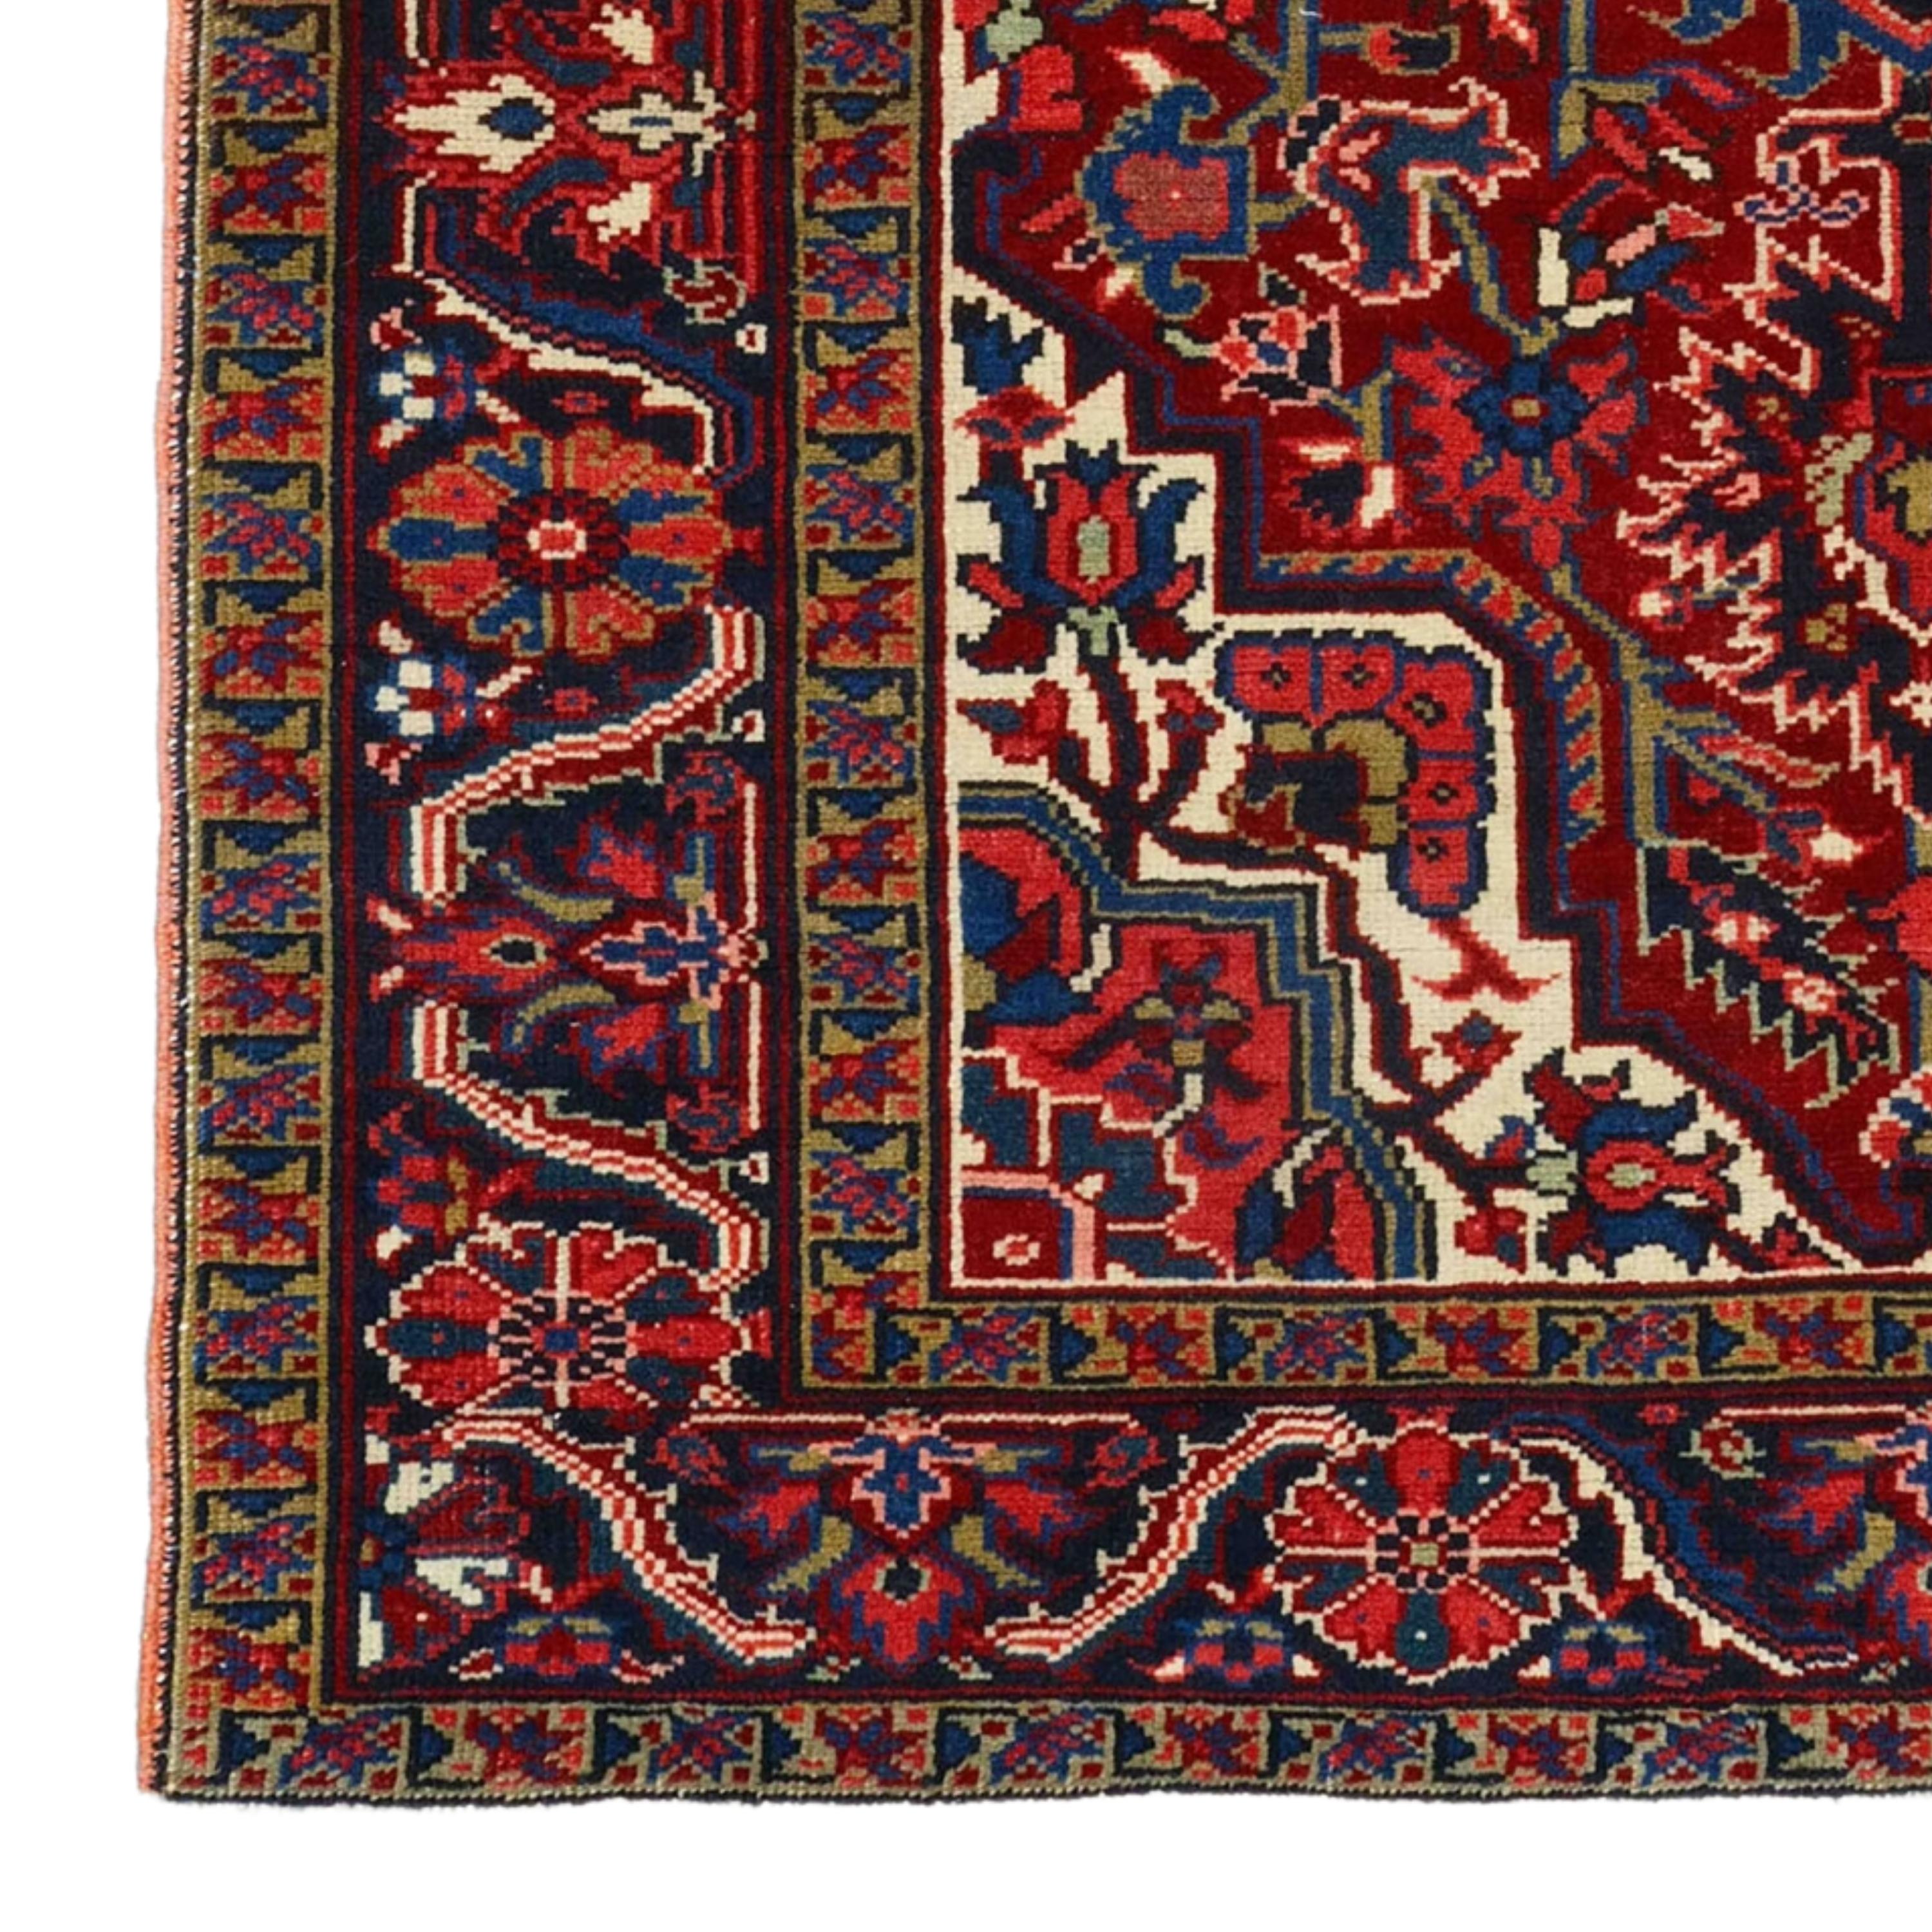 Late of the 19th Century Heriz Rug

This extraordinary carpet will fascinate you with its intricate designs and vibrant colors that reflect the rich history and craftsmanship of the period. Each stitch tells the story of skilled craftsmen who